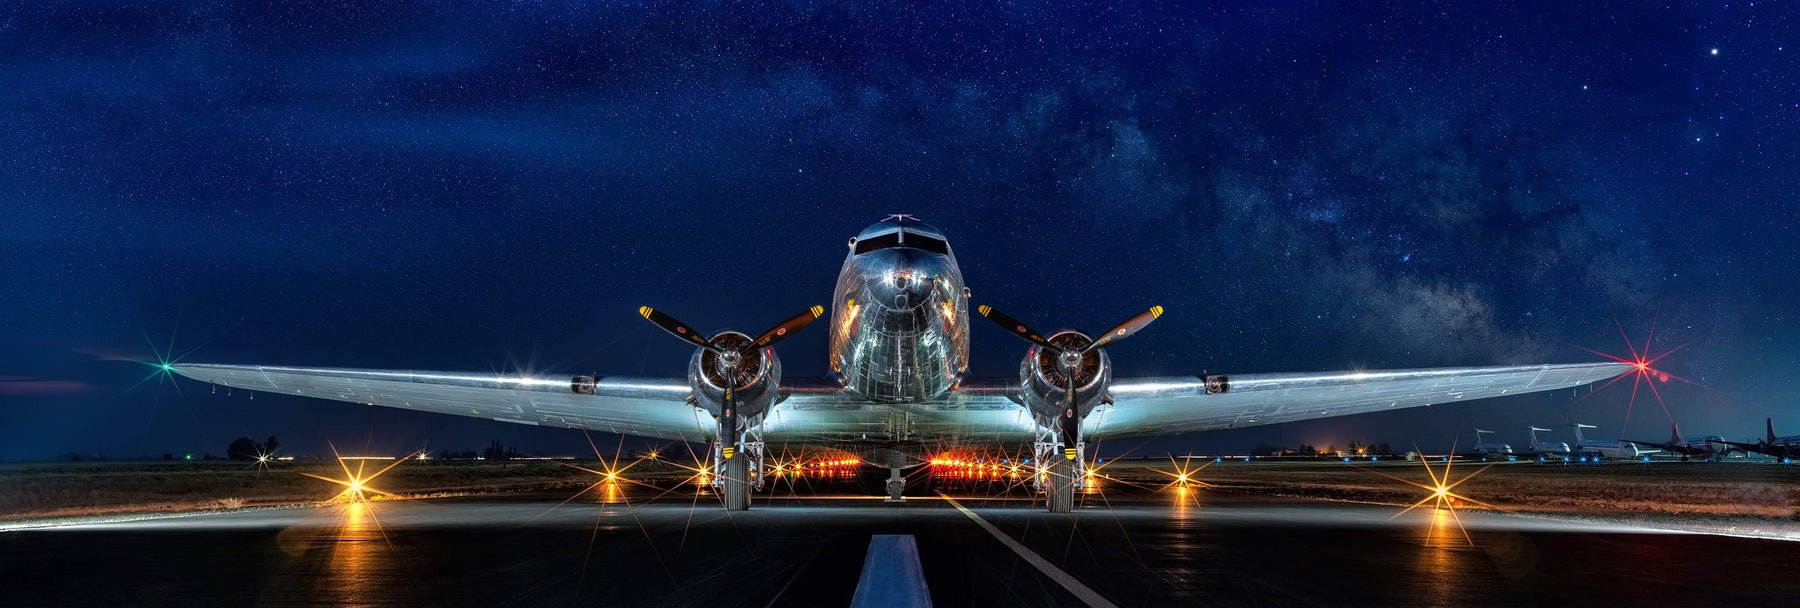 Photograph from Peter Lik or an airplane ready to take flight titled Midnight Flight | LIK Fine Art